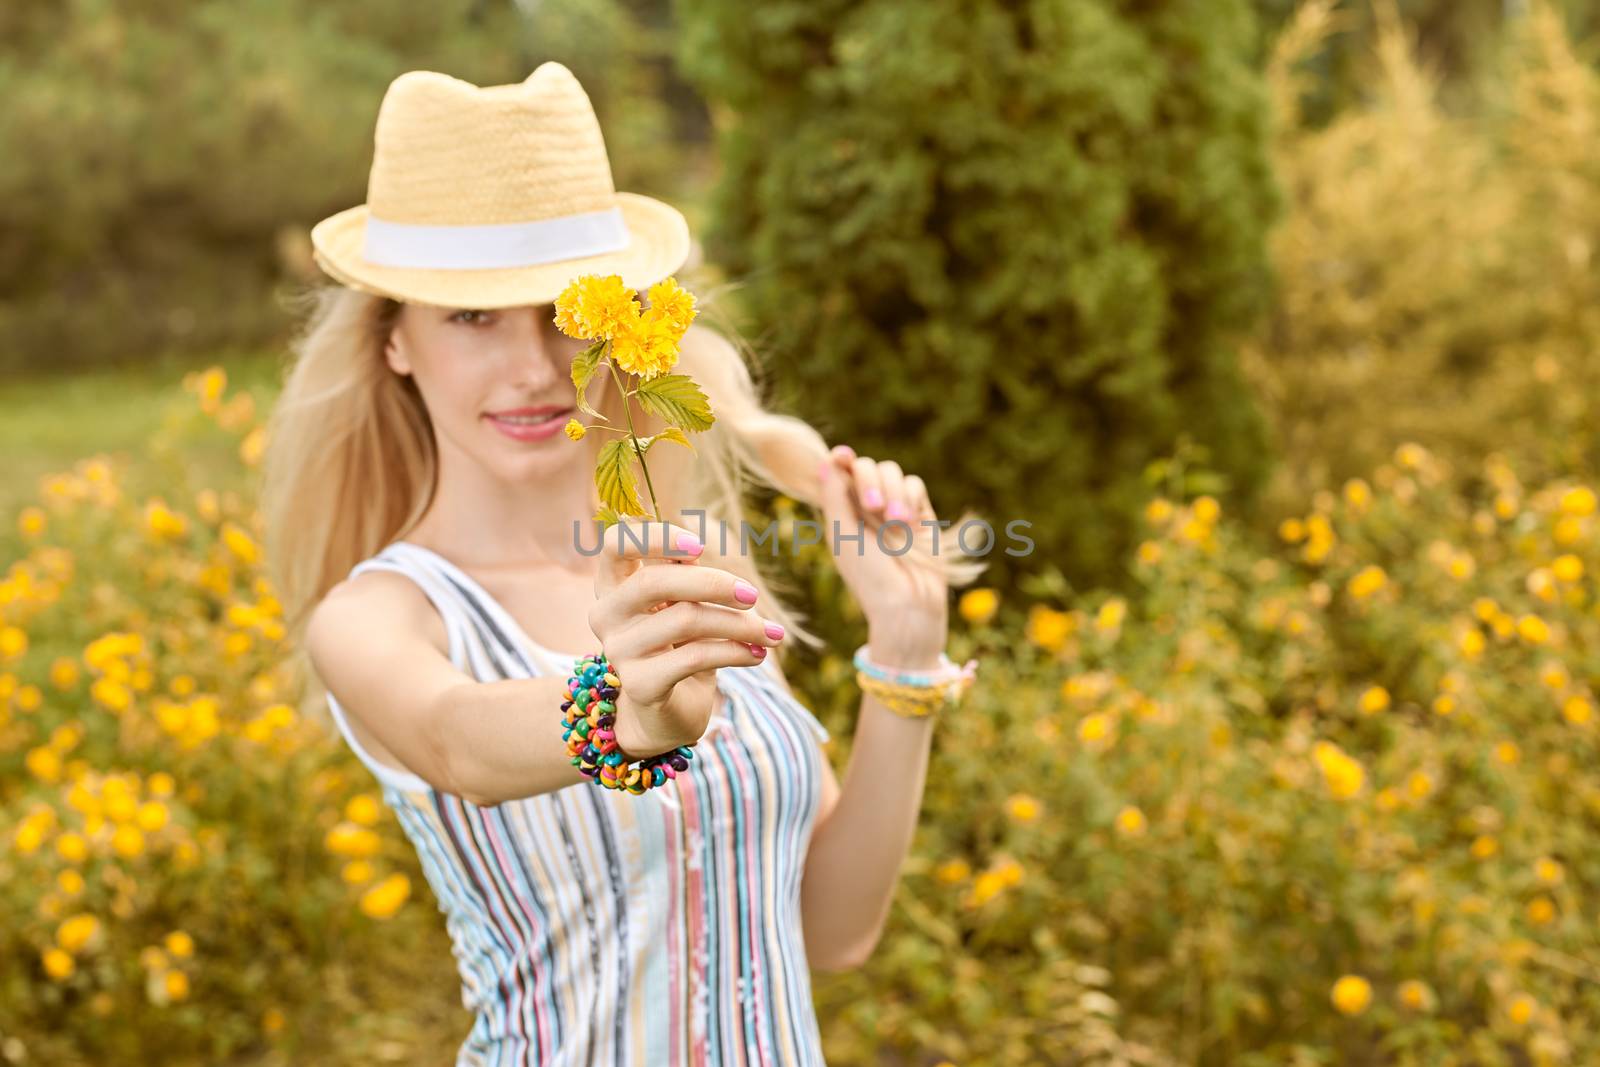 Beauty playful woman relax in summer garden smiling, people, outdoors, bokeh. Attractive happy blonde girl in hat with flower enjoying nature, harmony on meadow, lifestyle. Sunny day, forest,copyspace